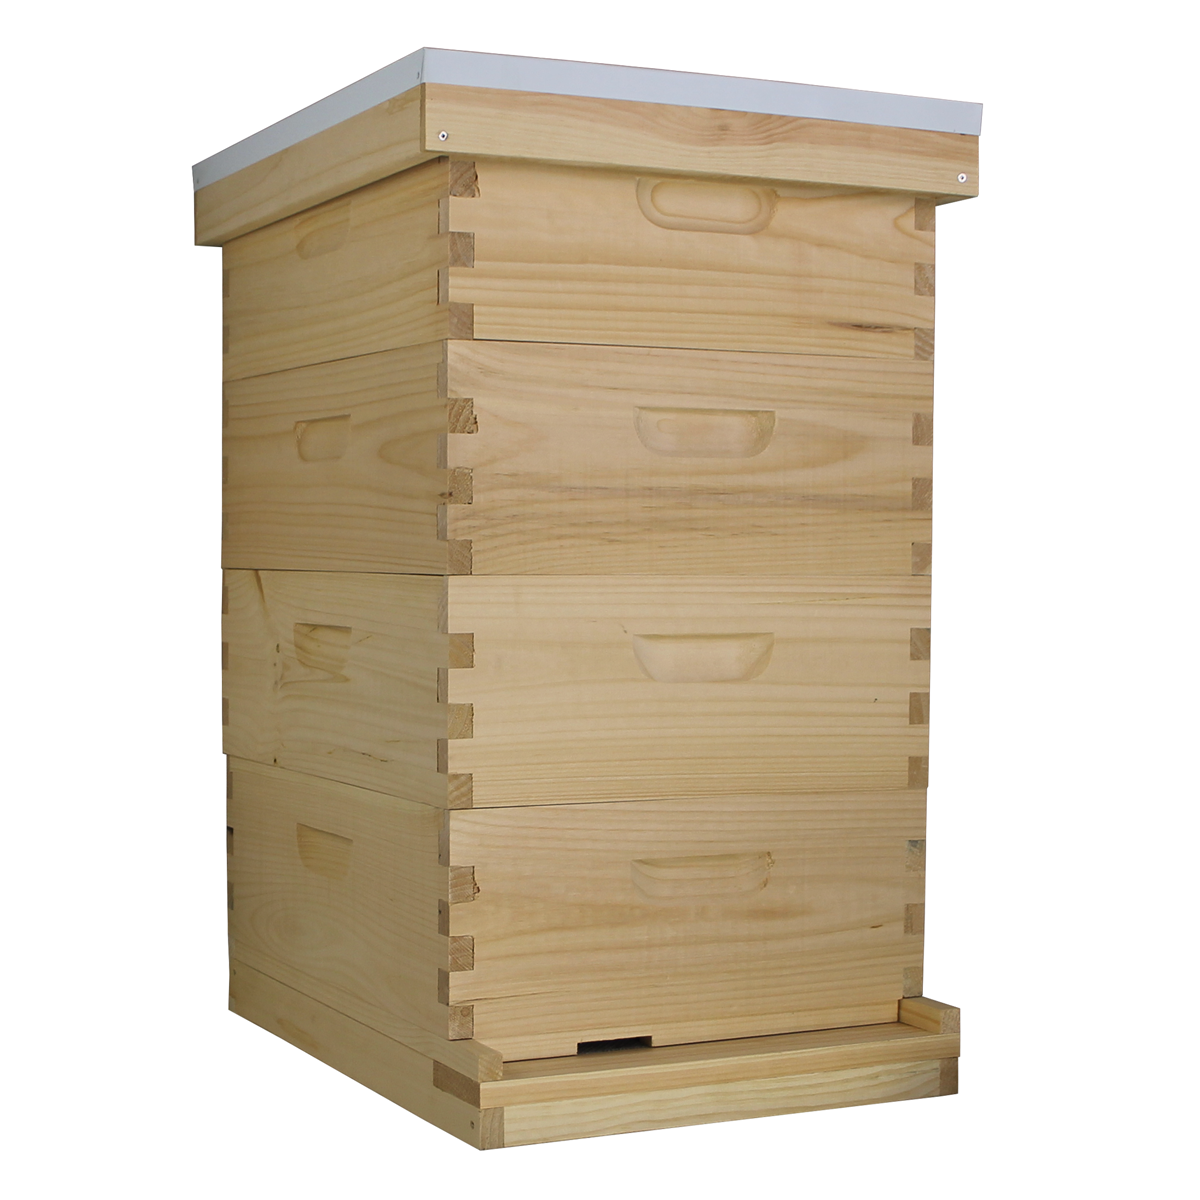 Busy Bees 'N' More Amish Made 10 Frame Beehive With 4 Mediums Bee Boxes